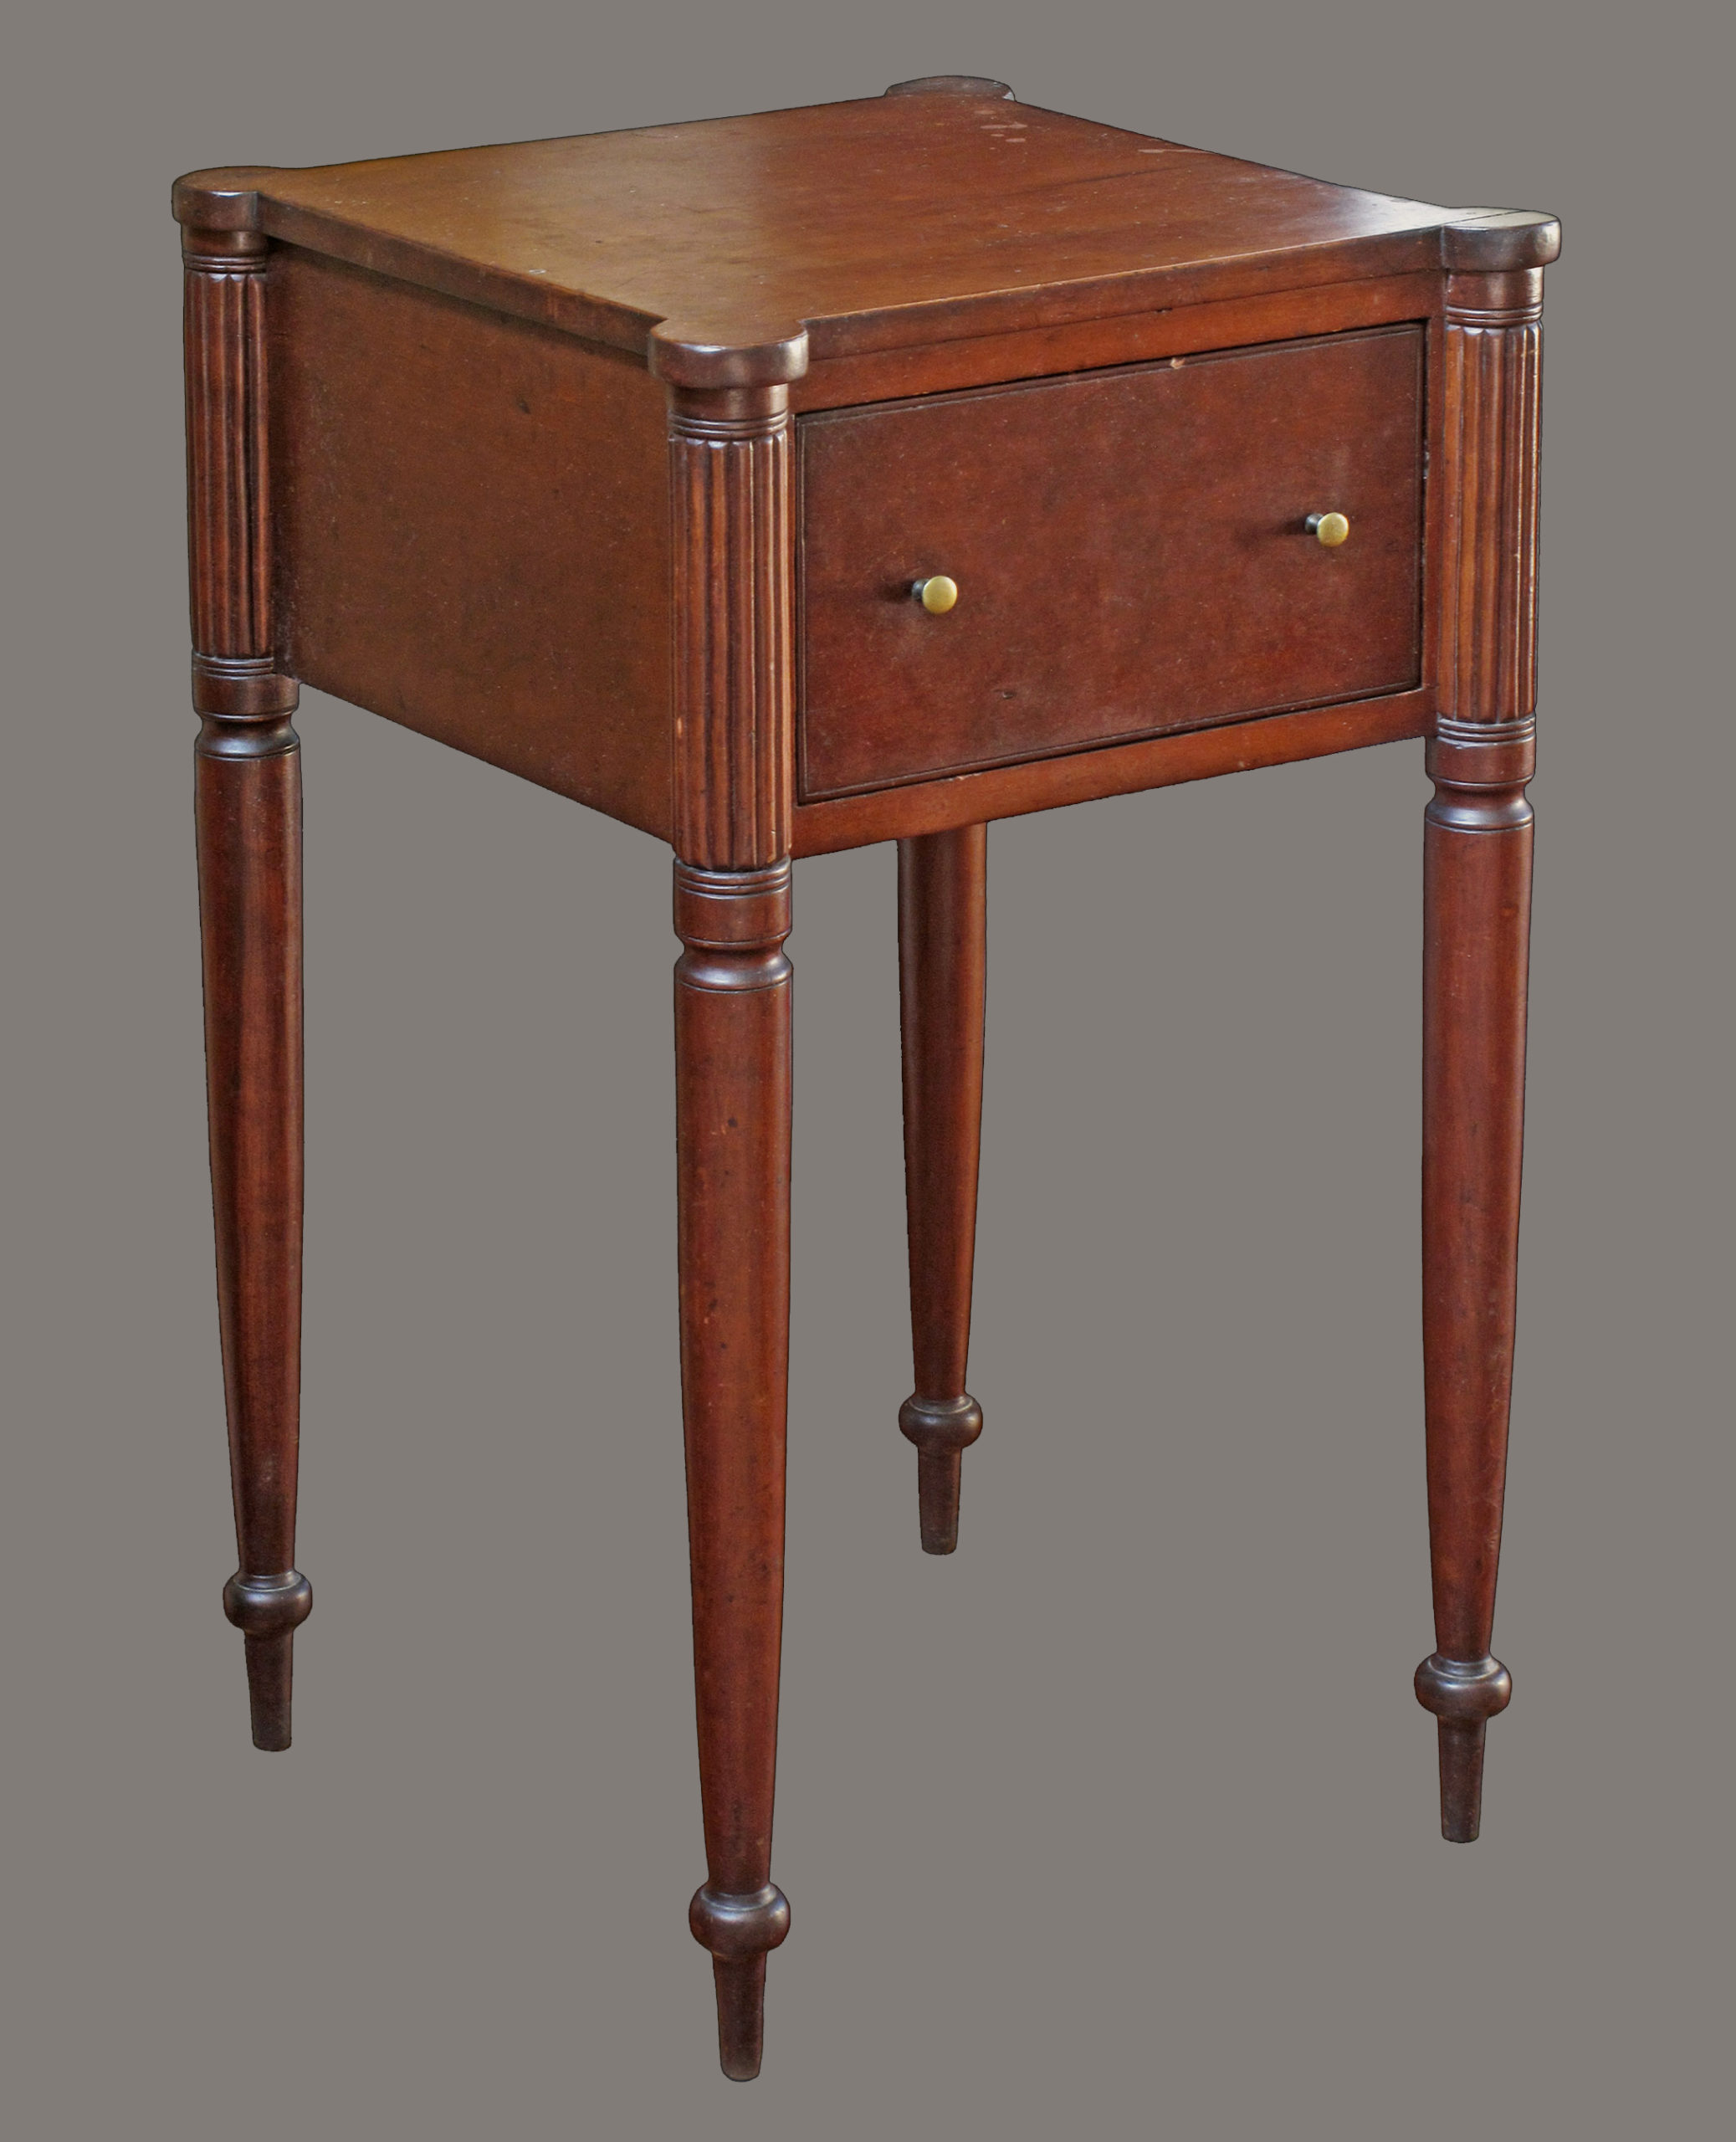 Work Stand, c. 1815, Frankfort, KY.